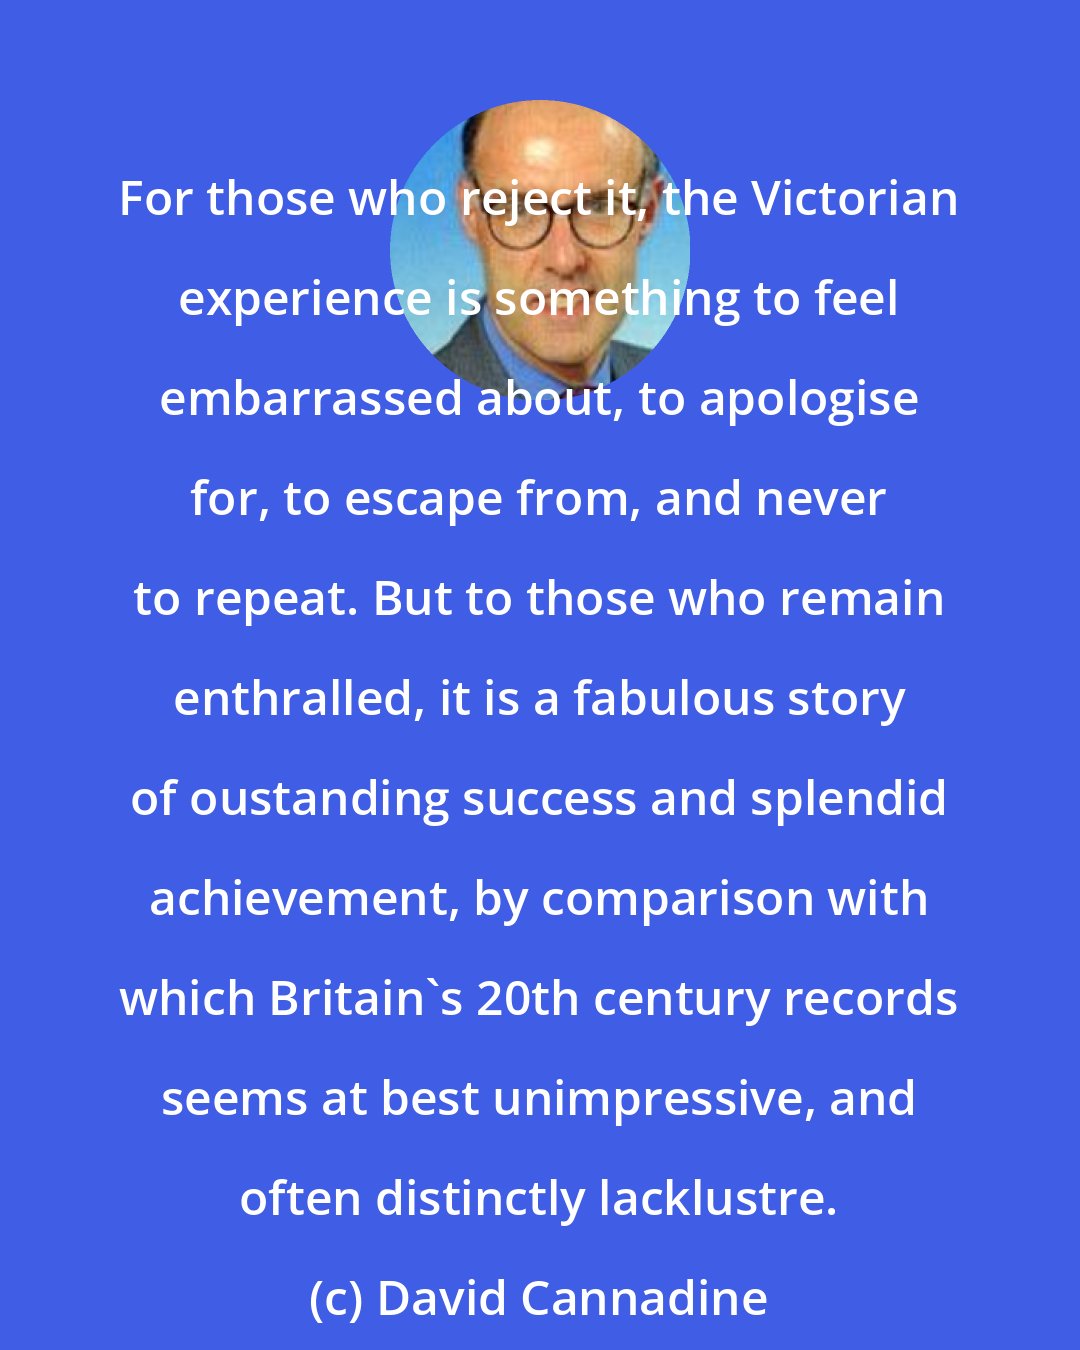 David Cannadine: For those who reject it, the Victorian experience is something to feel embarrassed about, to apologise for, to escape from, and never to repeat. But to those who remain enthralled, it is a fabulous story of oustanding success and splendid achievement, by comparison with which Britain's 20th century records seems at best unimpressive, and often distinctly lacklustre.